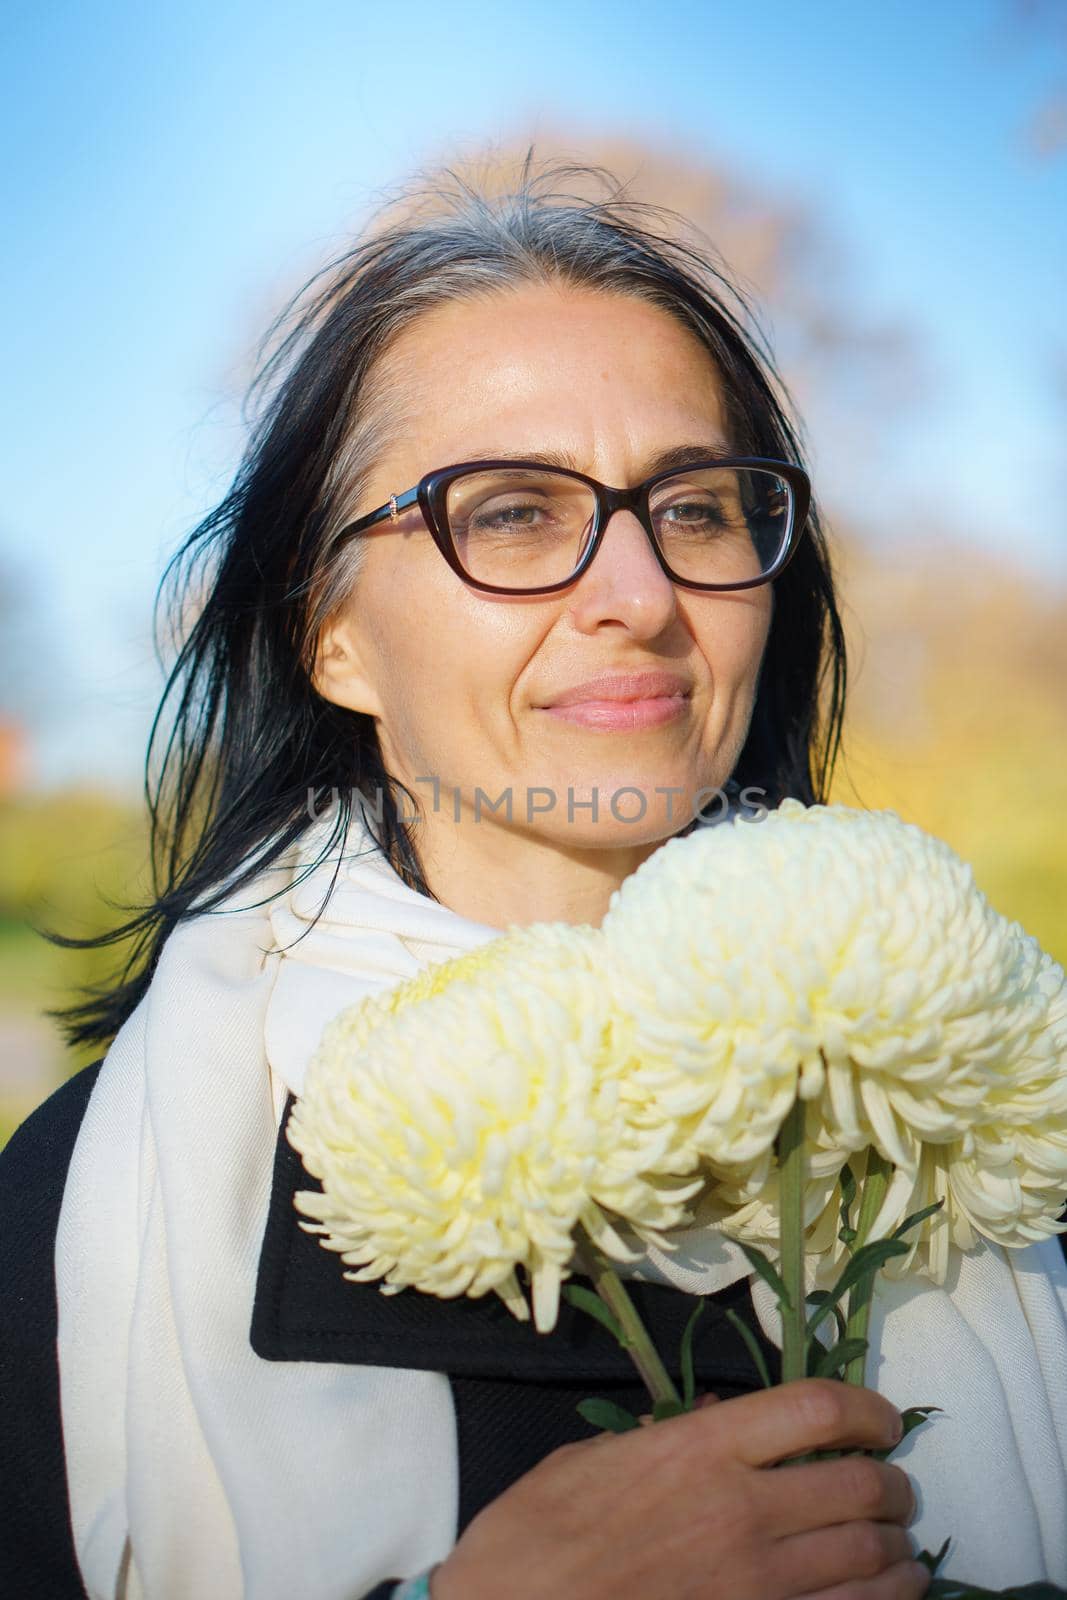 A beautiful middle-aged woman getting grey-haired in a dark coat in a spring town with a bouquet of flowers